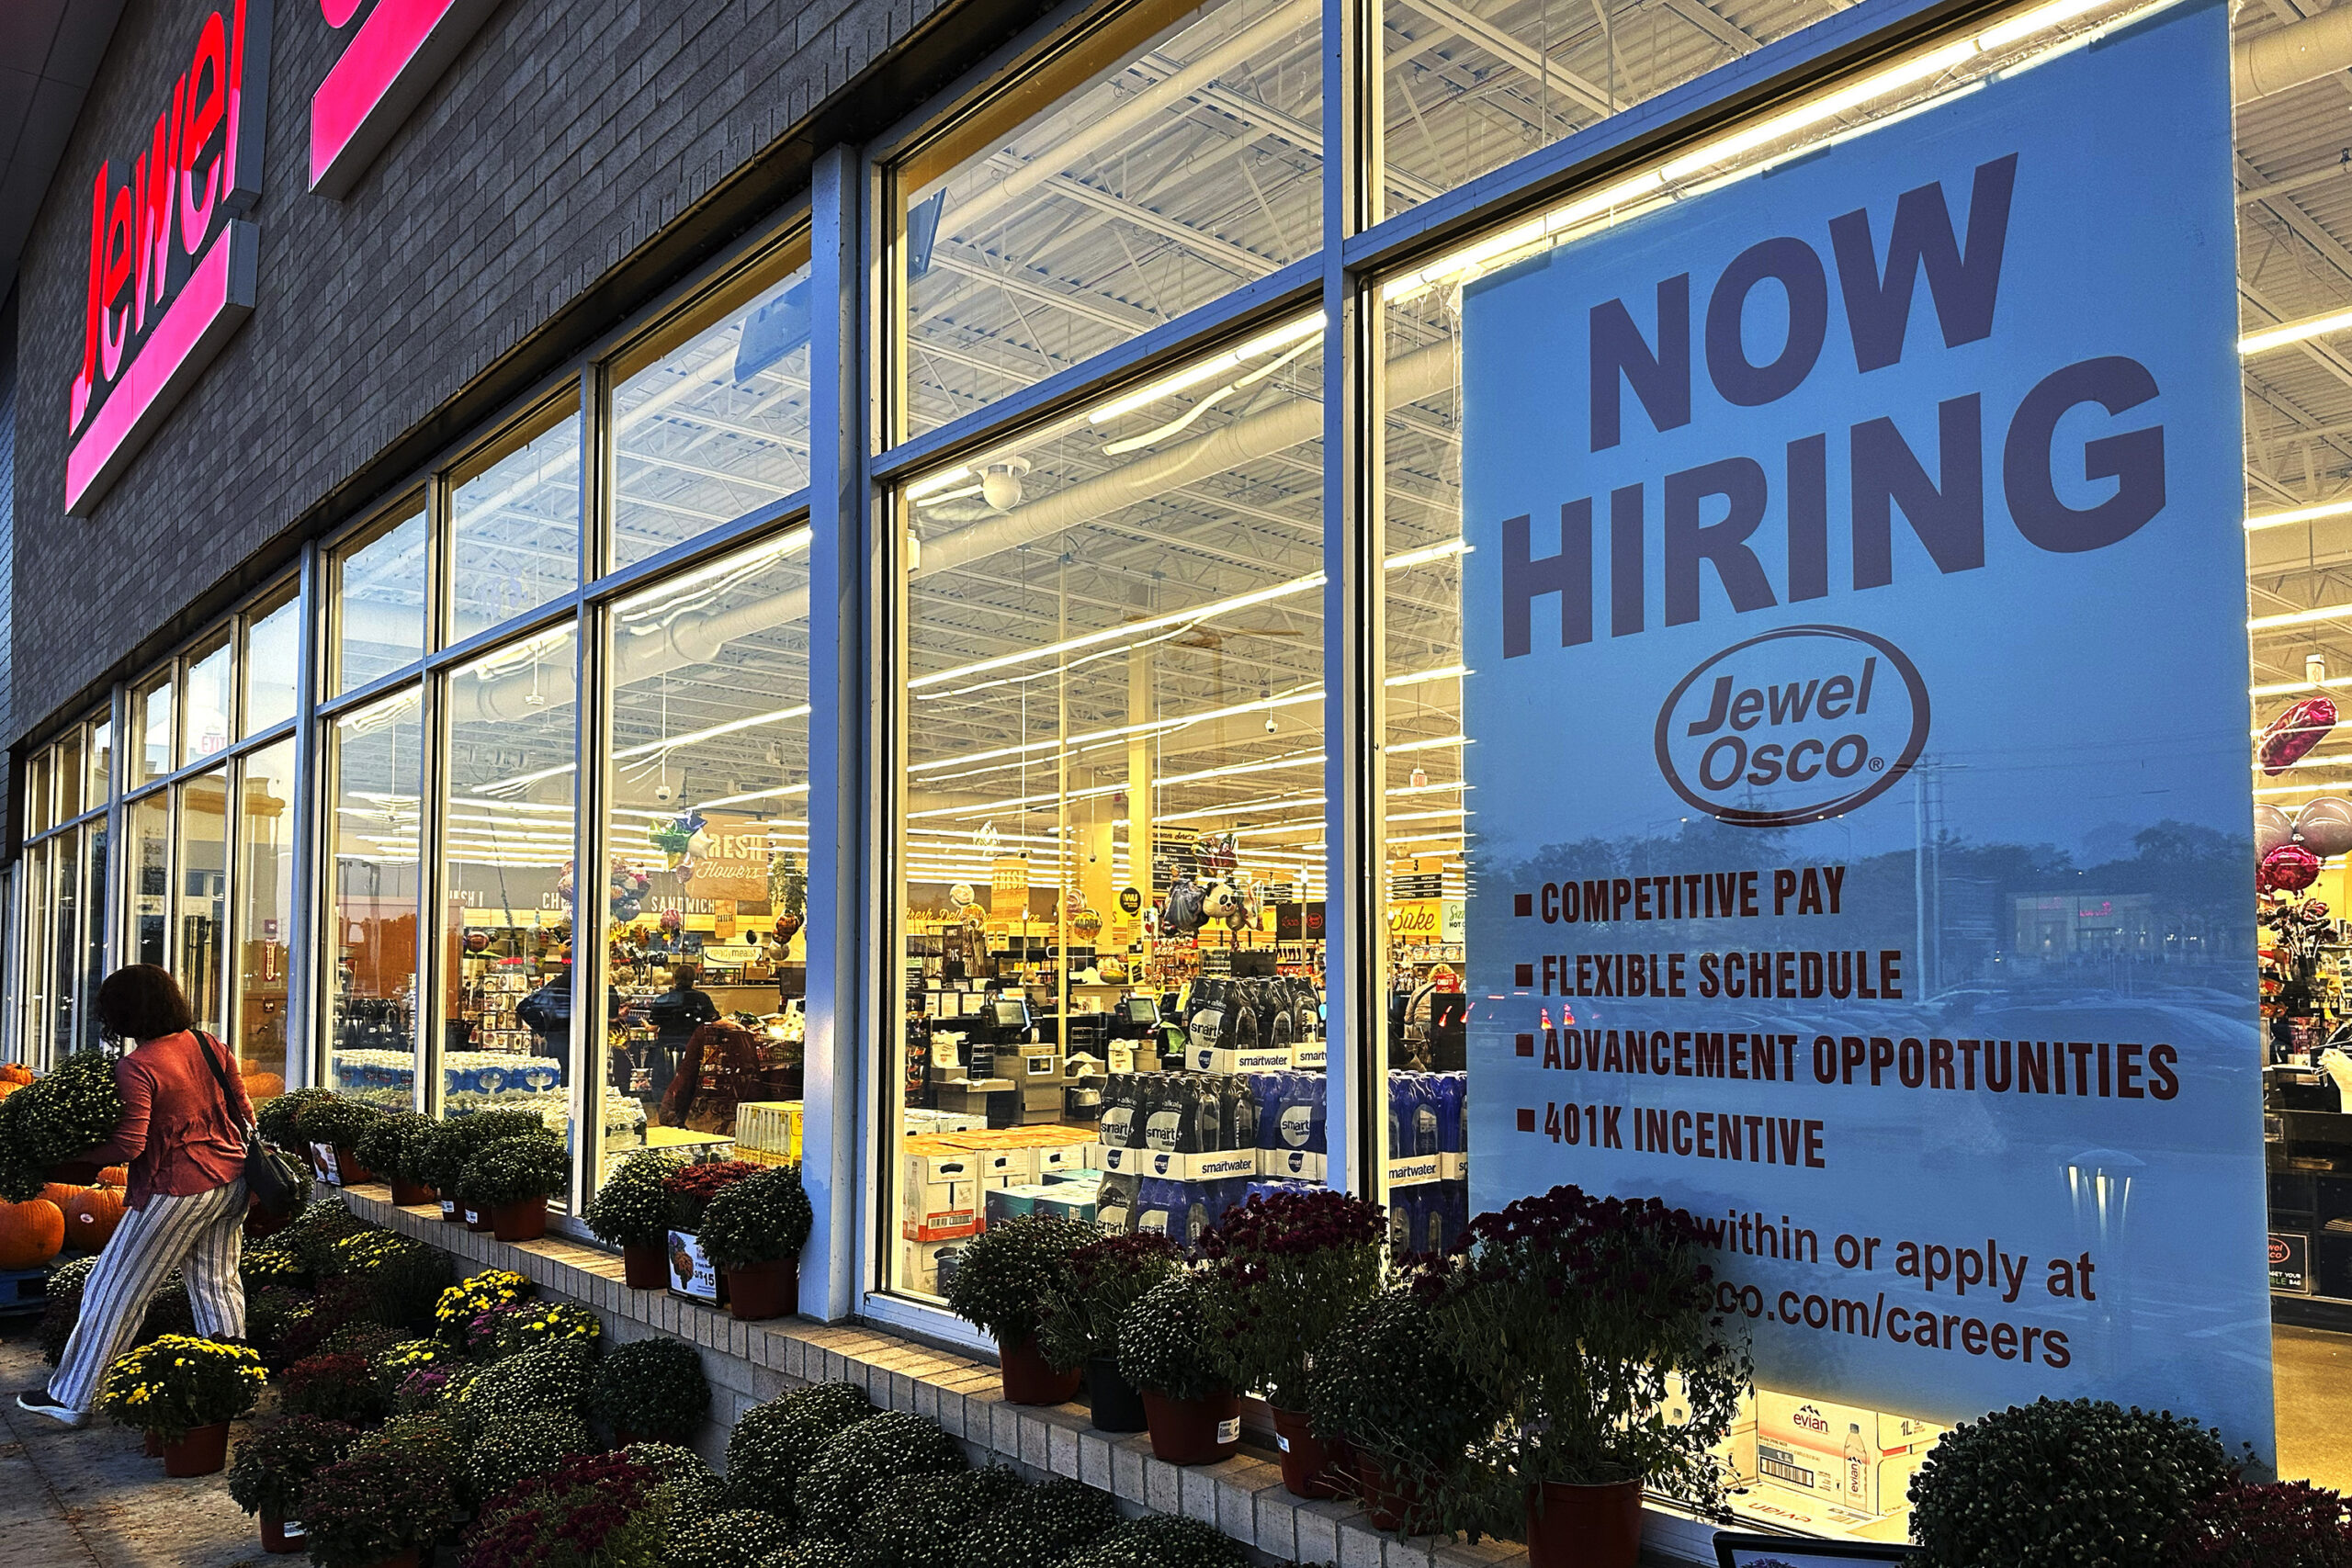 A hiring sign is displayed at a grocery store.